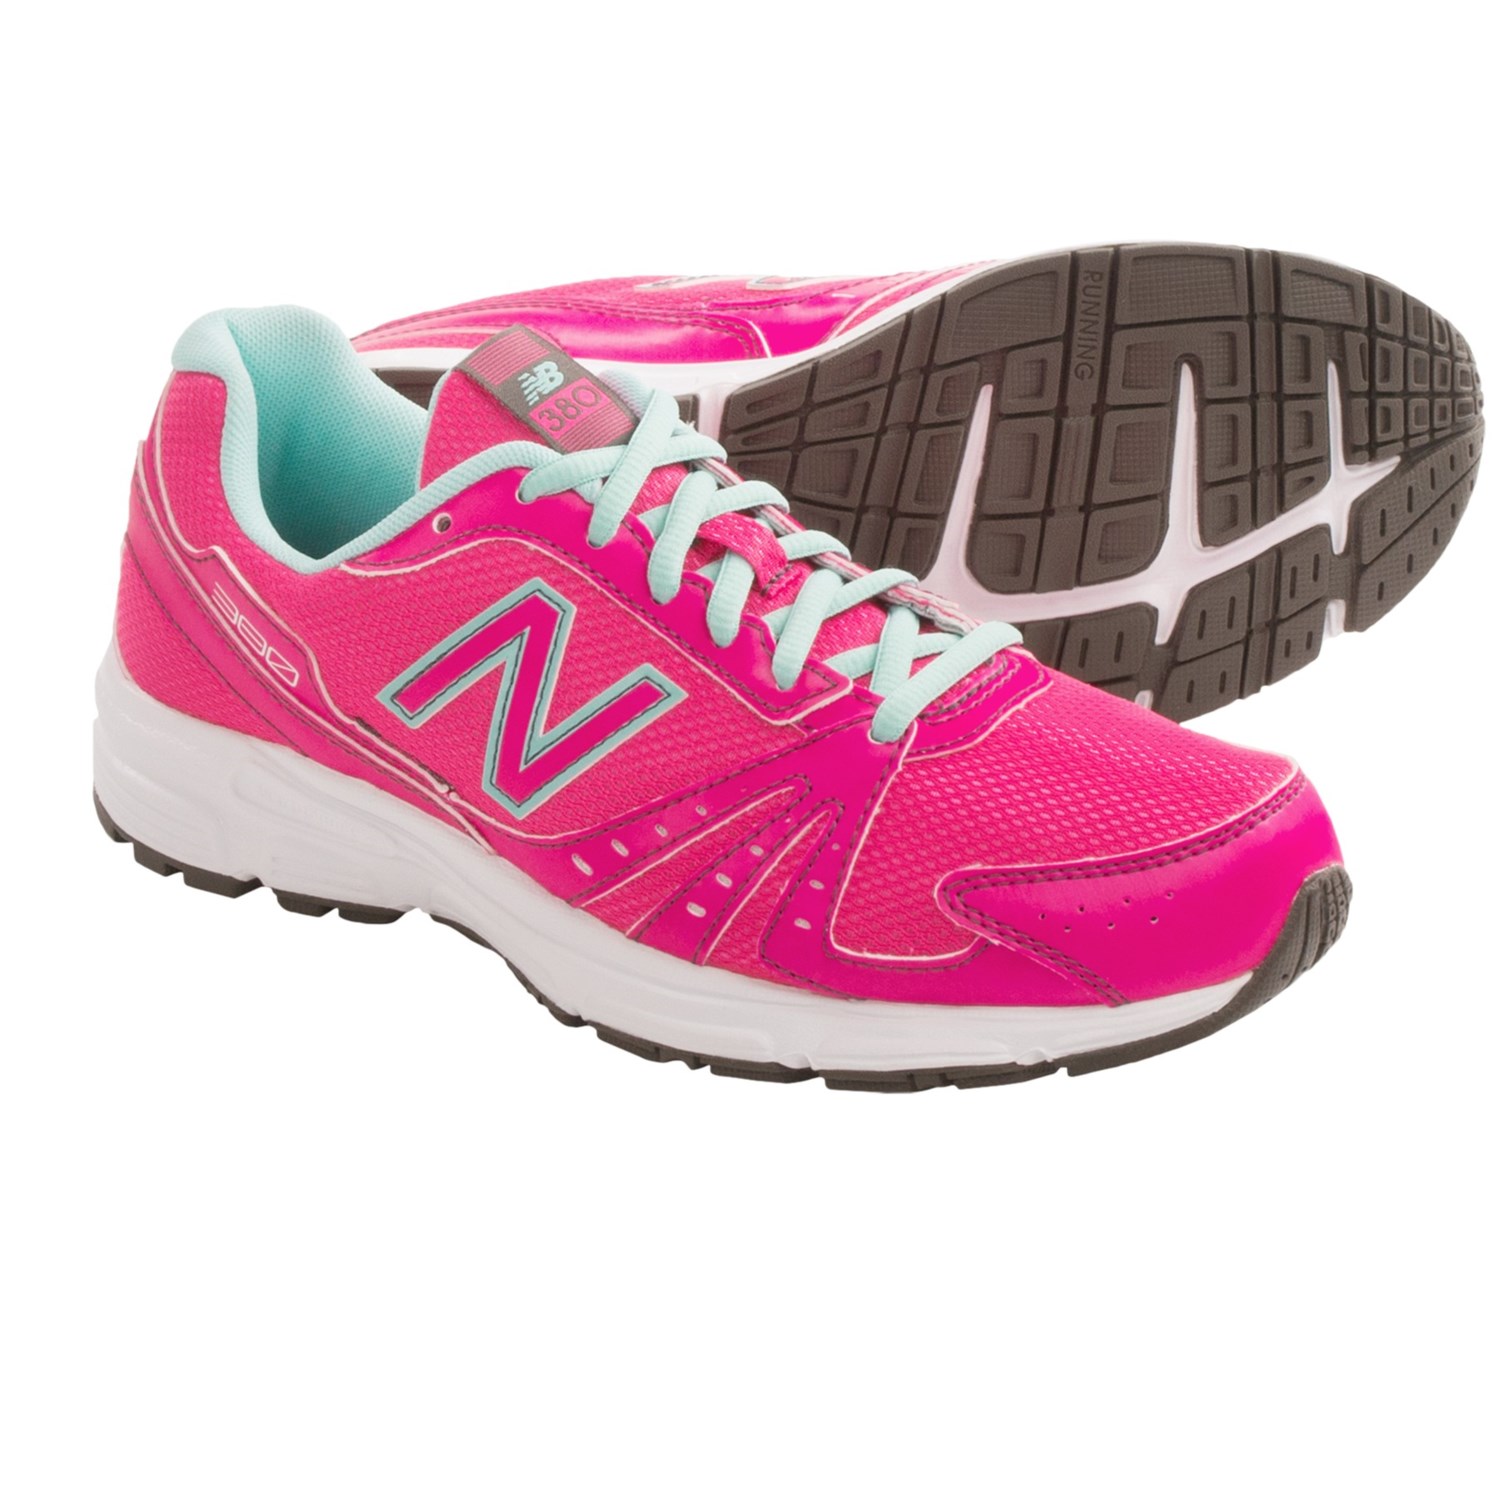 New Balance 380 Neutral Running Shoes (For Women) - Save 29%